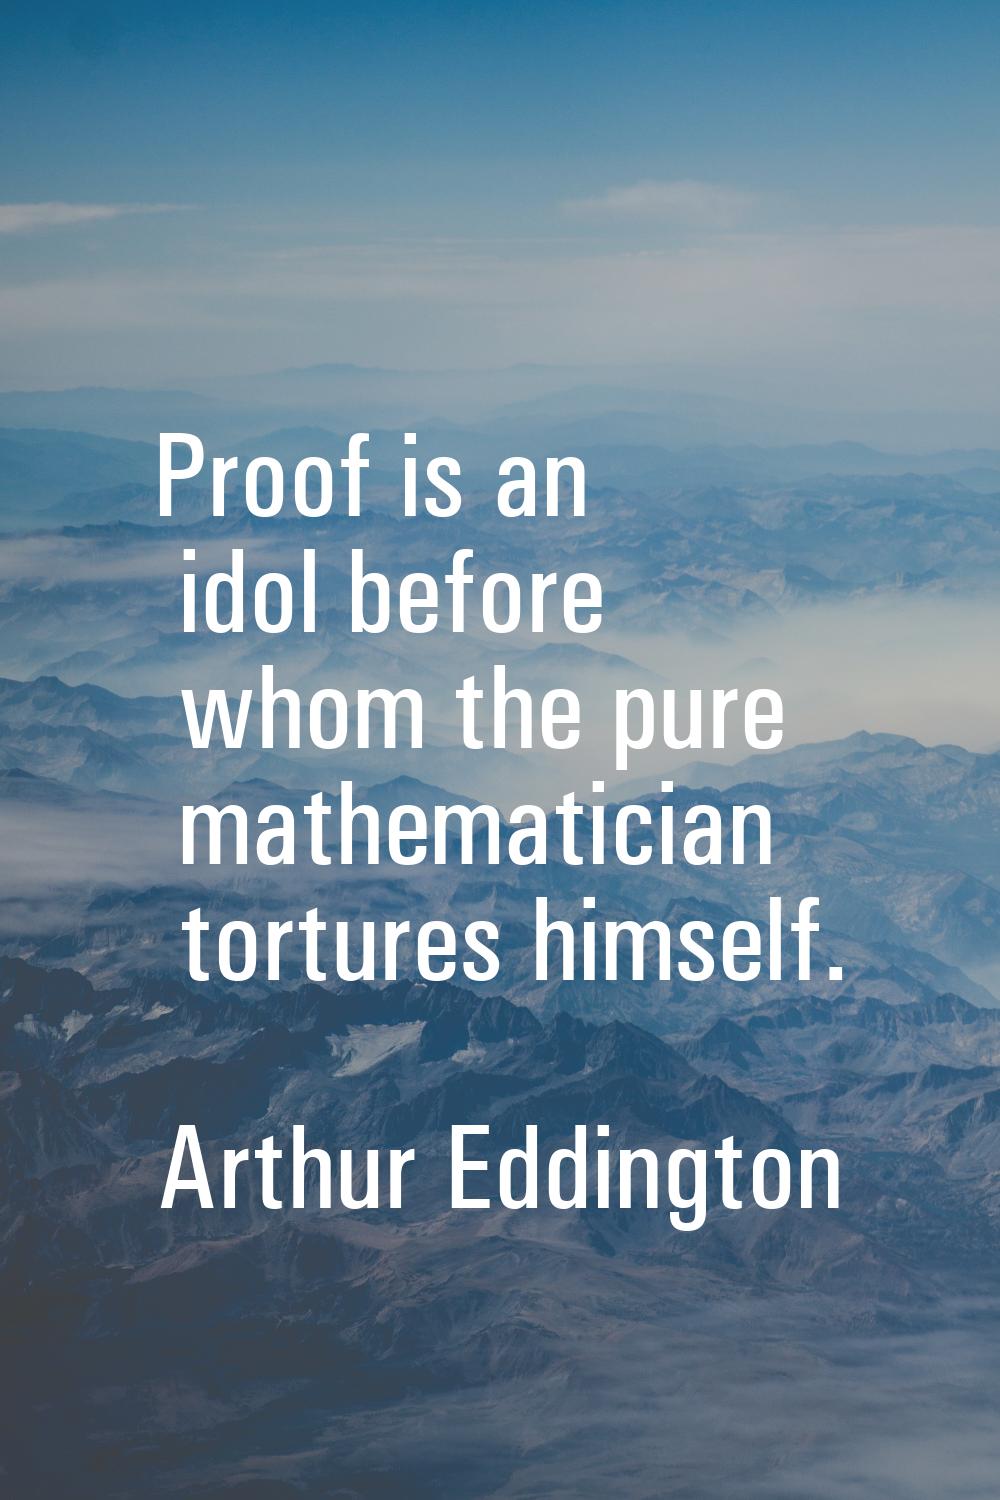 Proof is an idol before whom the pure mathematician tortures himself.